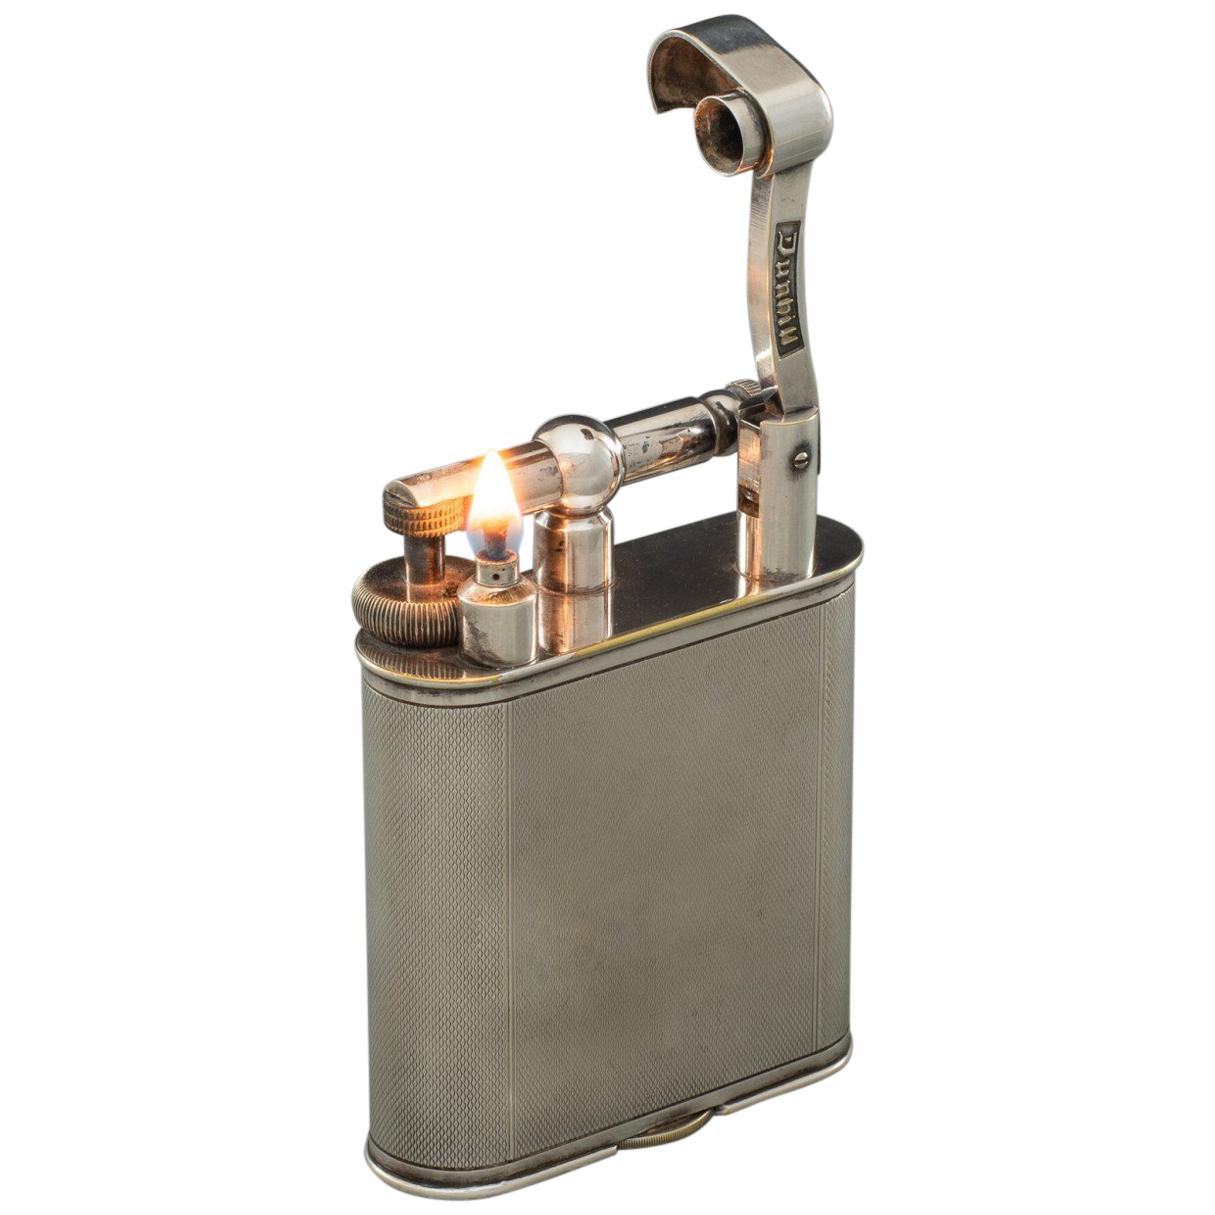 Silver Plated Dunhill 'Giant' Lighter with Engine Turned Finish, circa 1948